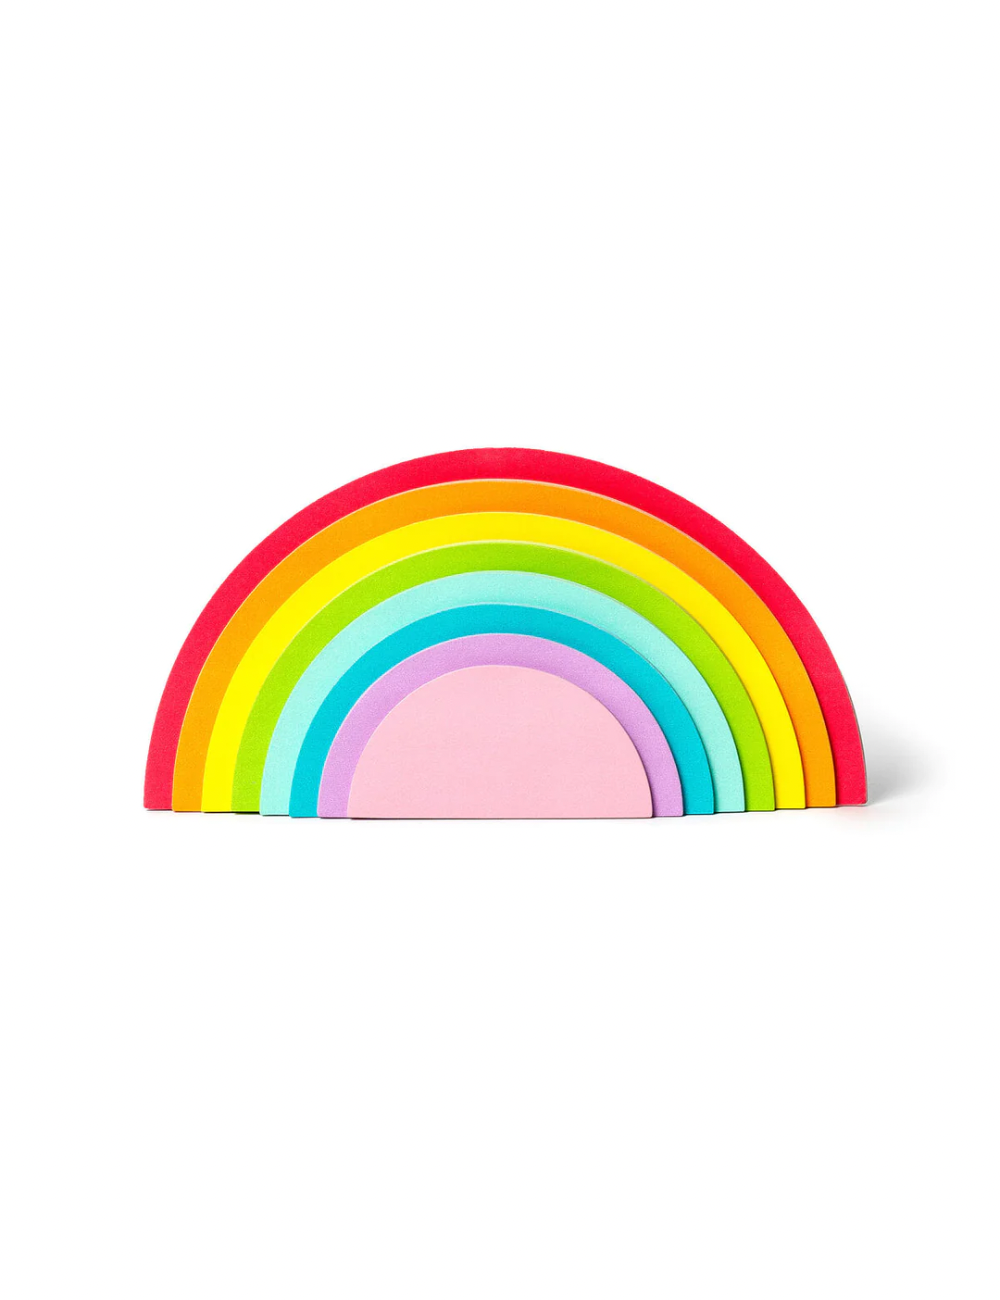 Rainbow Thoughts Sticky Notepad